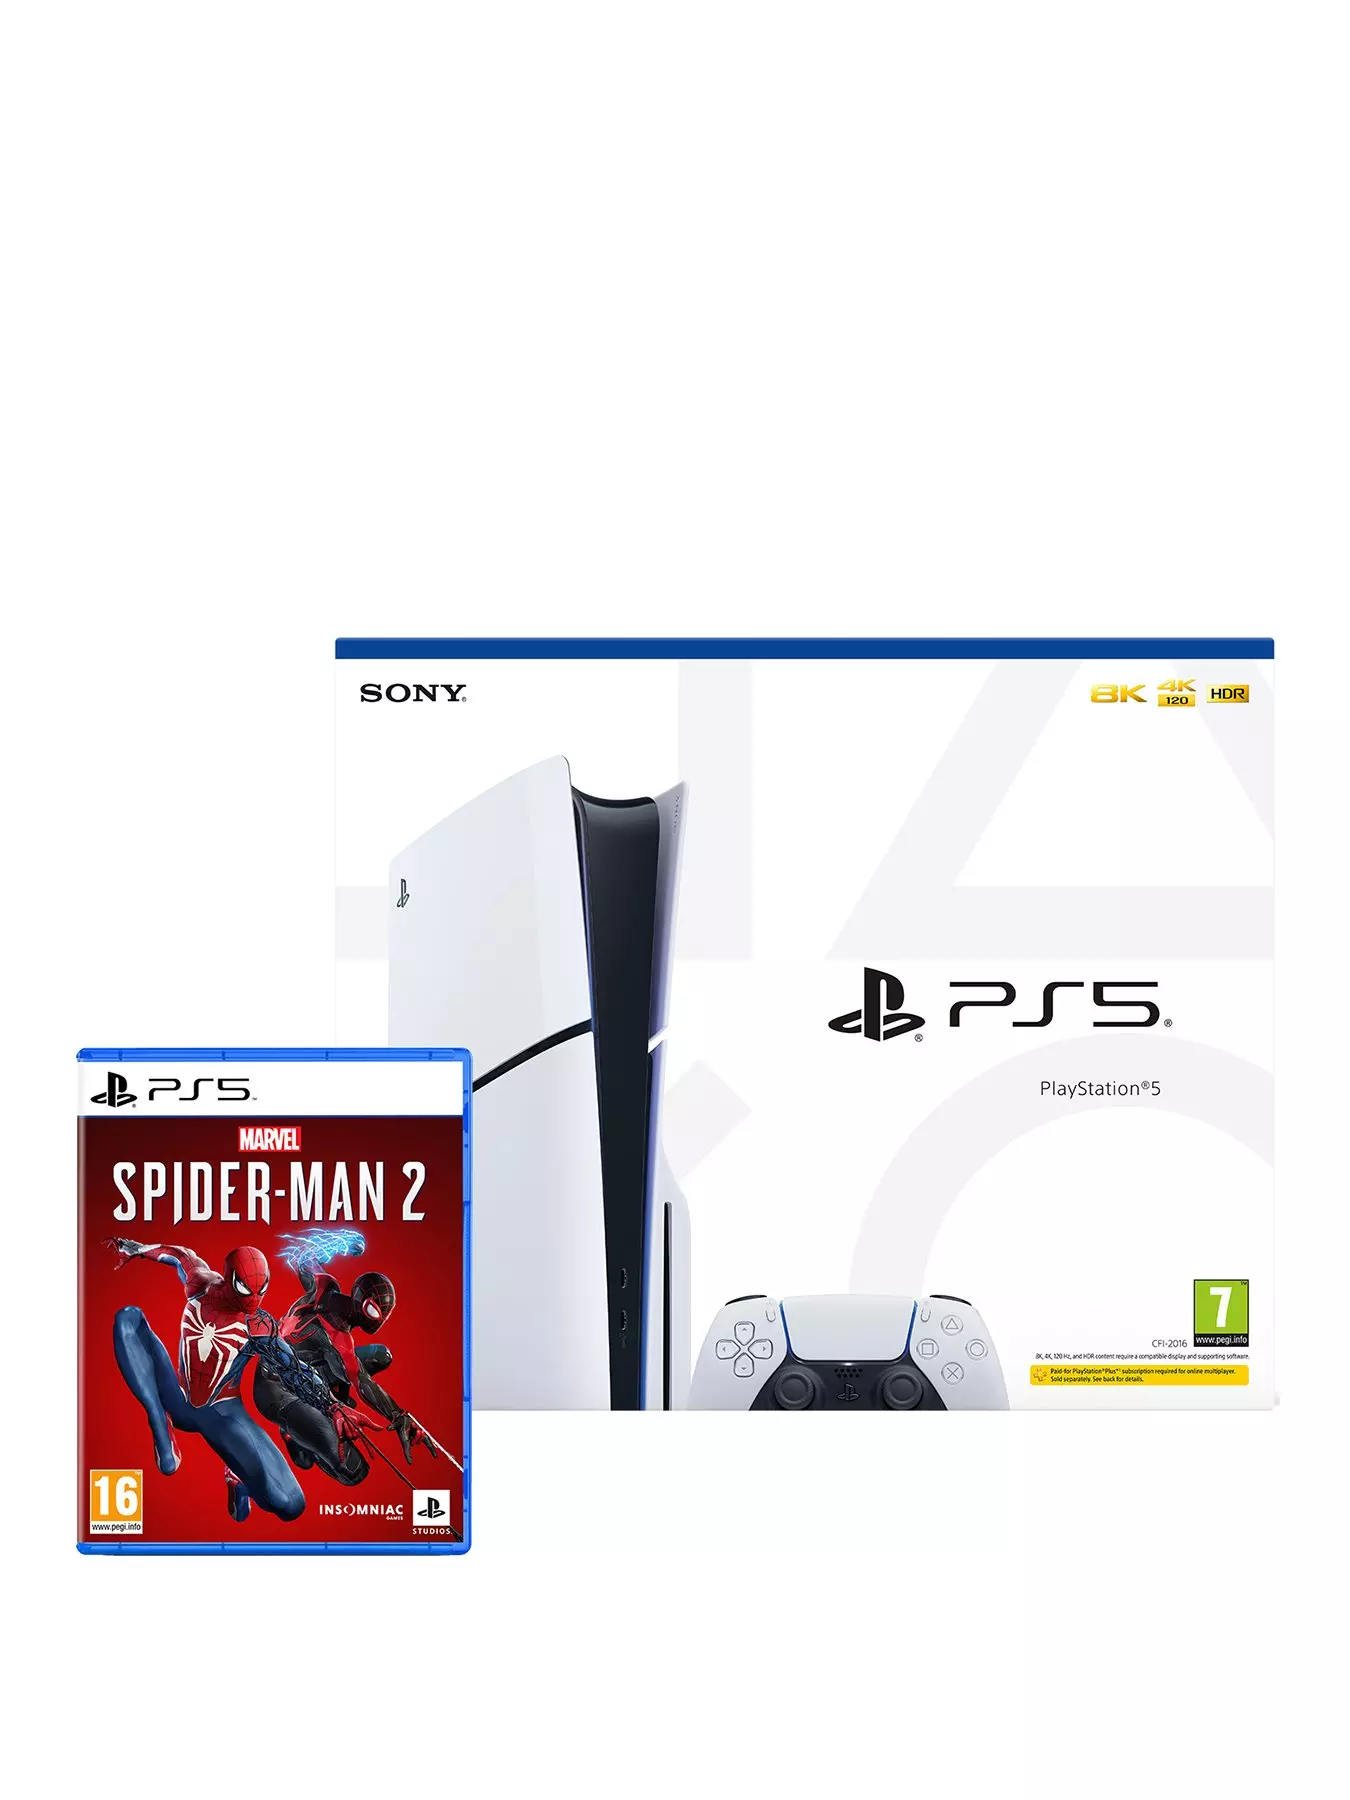 New TEC Sony PlayStation 4(PS4) 1TB Slim Gaming Console with EA SPORTS FC( FIFA) 24 Bundle 